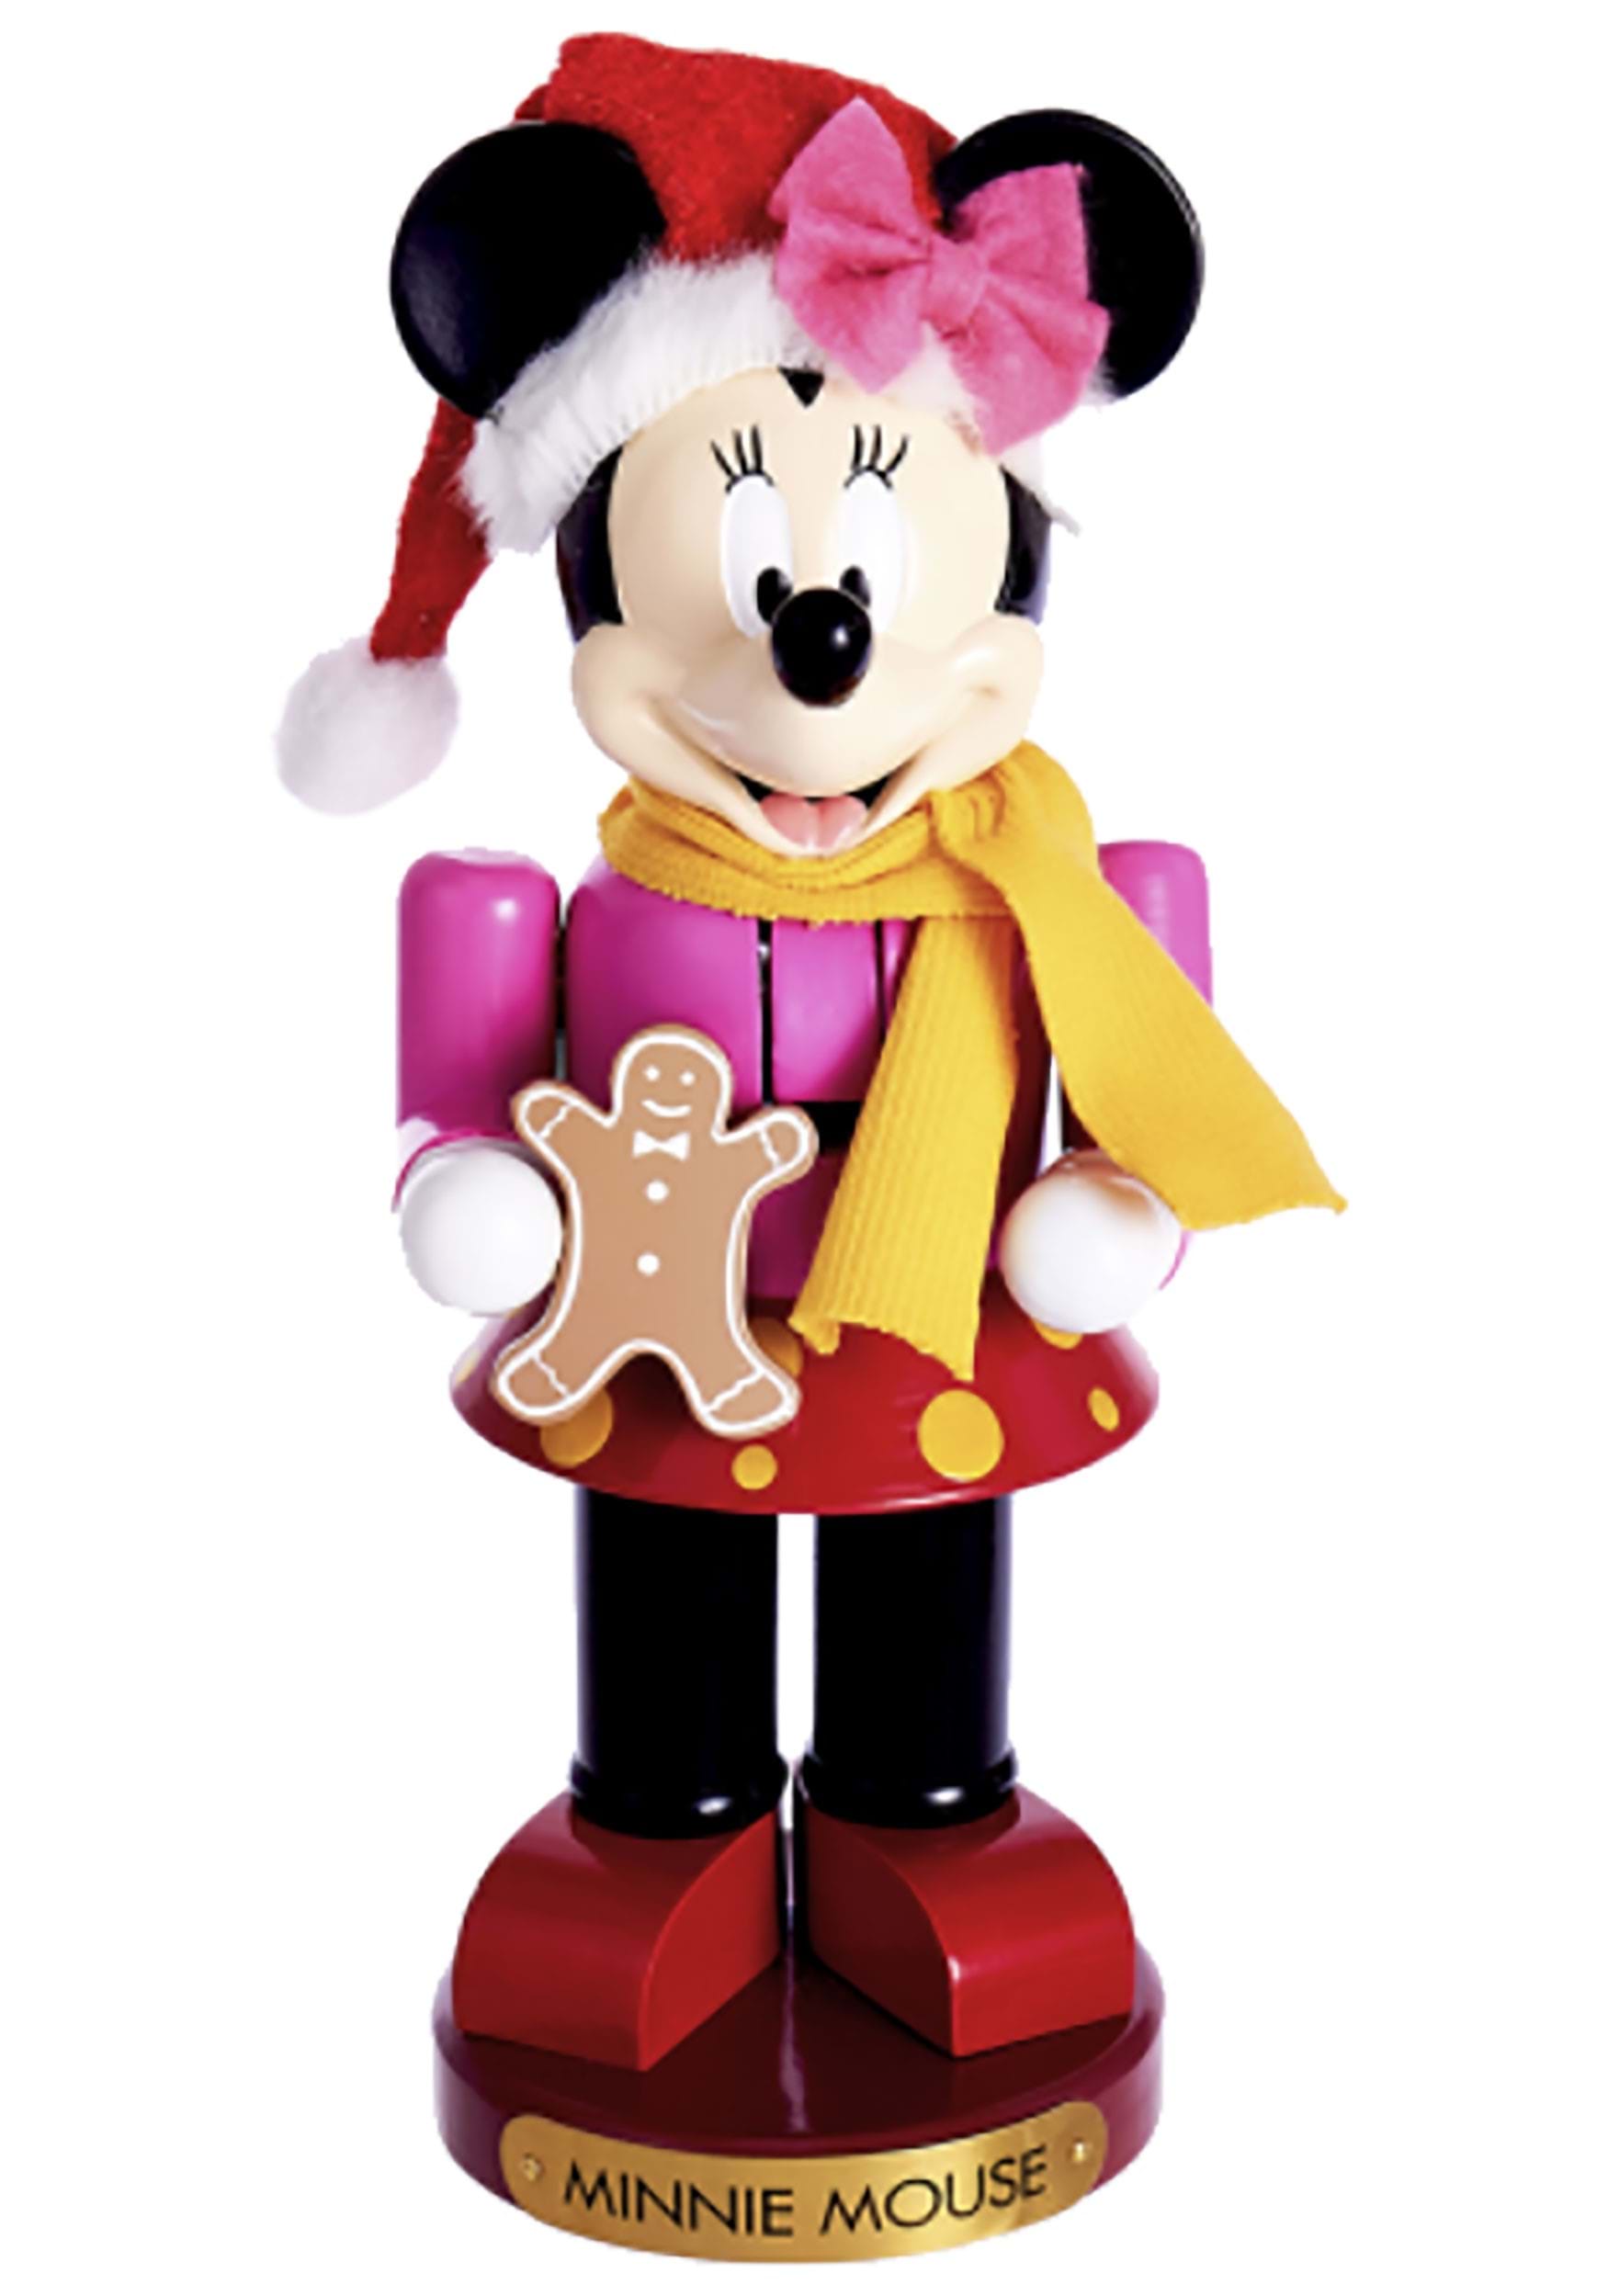 Minnie Mouse Nutcracker with Gingerbread Man